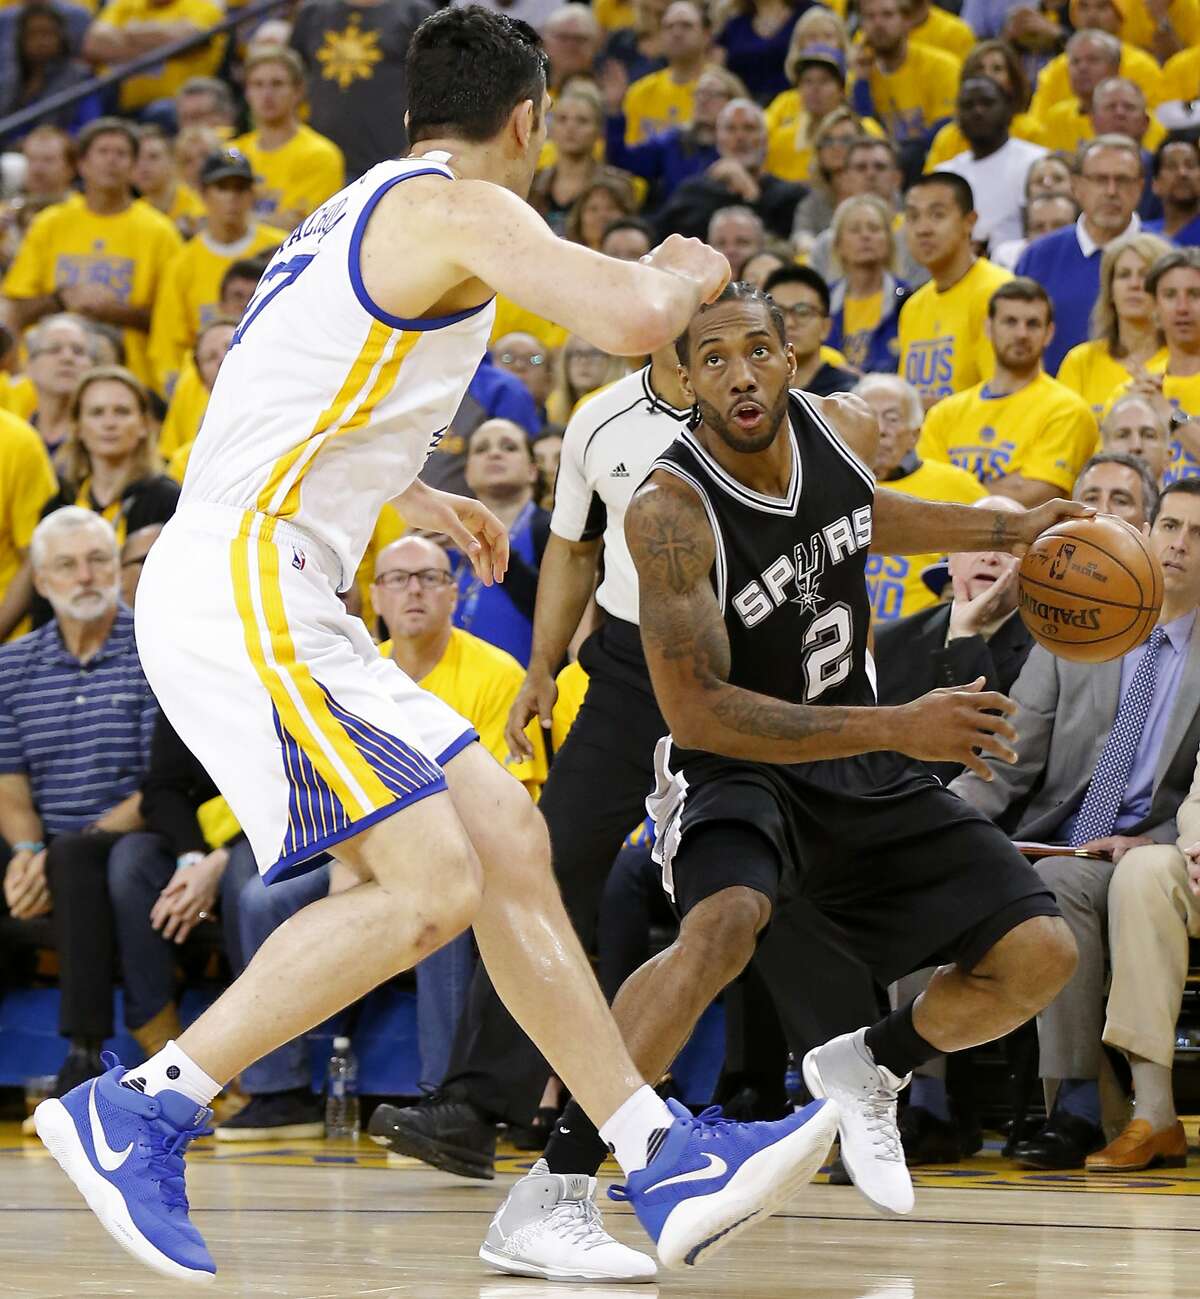 San Antonio Spurs' Kawhi Leonard looks for room against Golden State Warriors' Zaza Pachulia during second half action of Game 1 in the Western Conference Finals held Sunday May 14, 2017 at Oracle Arena in Oakland, CA. Leonard was injured on a play. The Warriors won 113-111.